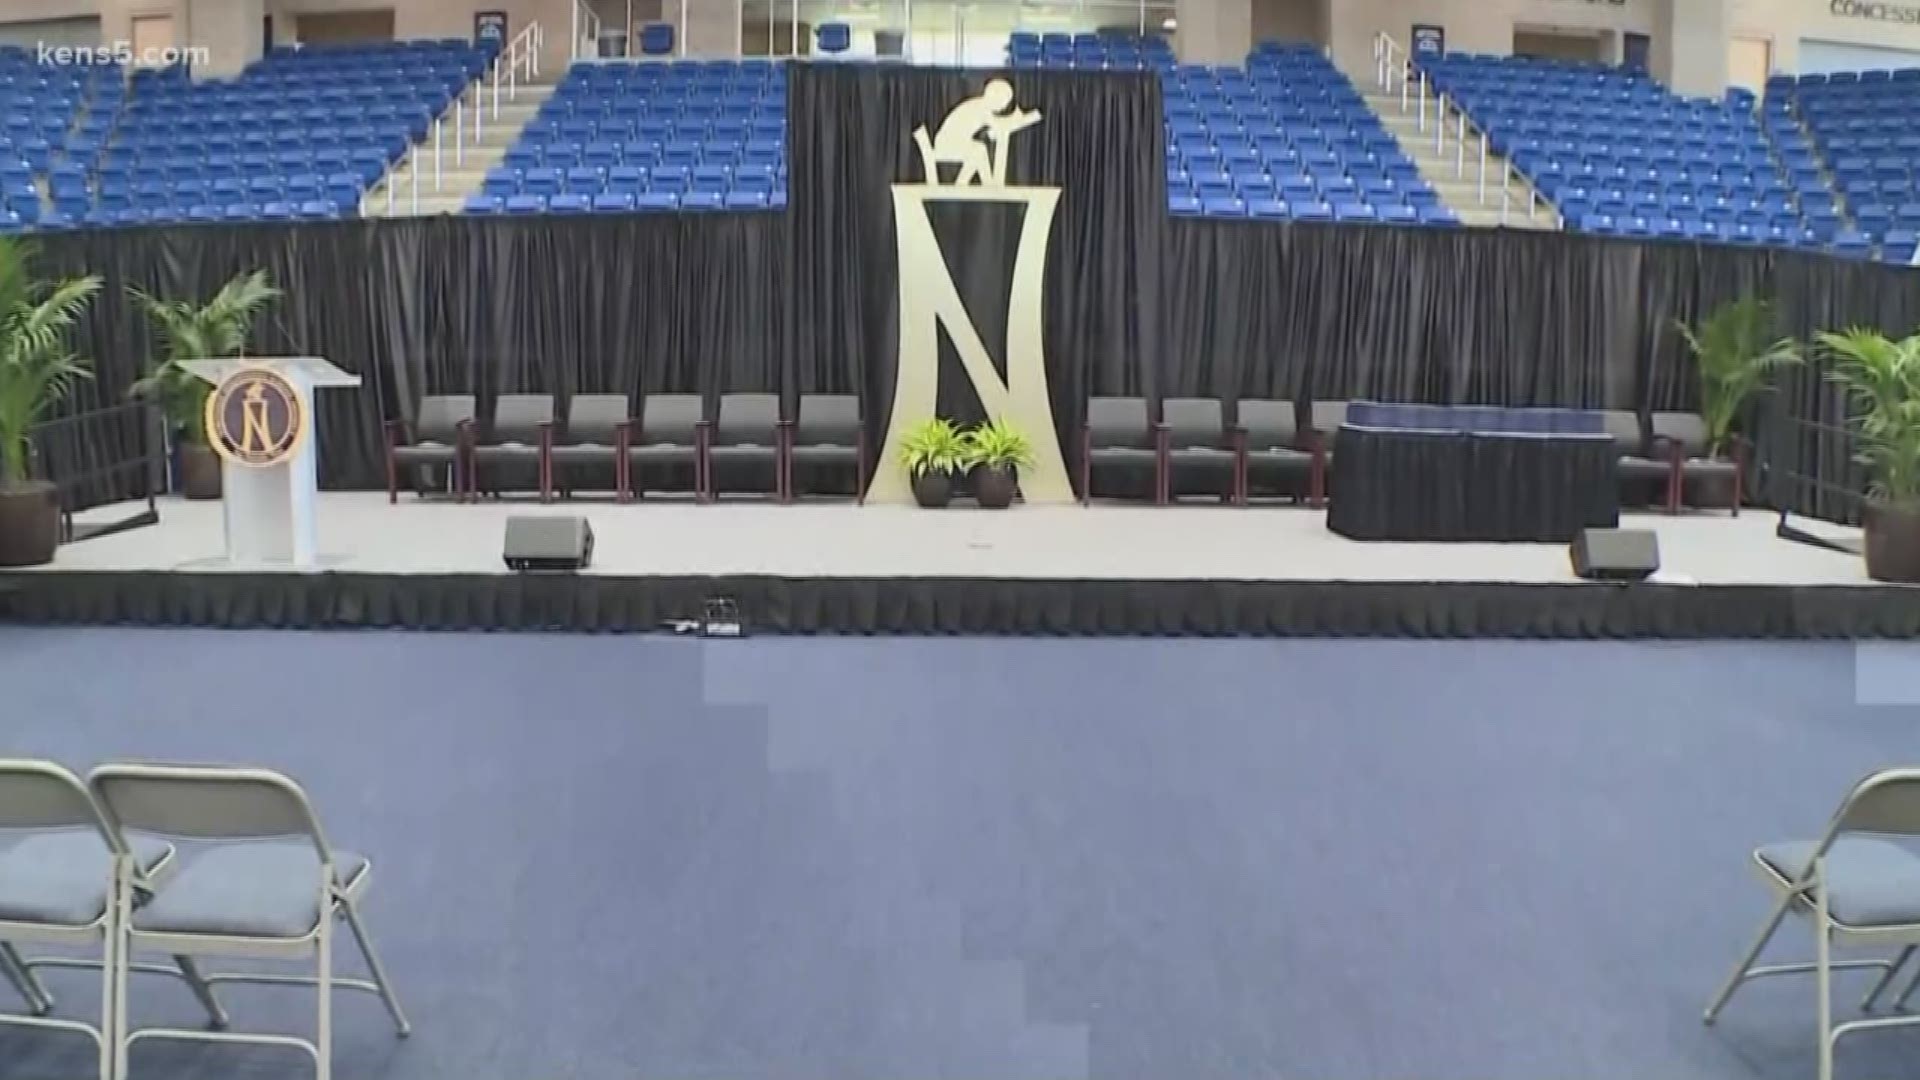 Thousands of high school graduates earn their diplomas tonight - Walking across the stage is especially meaningful for one senior at Health Careers High School. Eyewitness News reporter Savannah Louie has more.